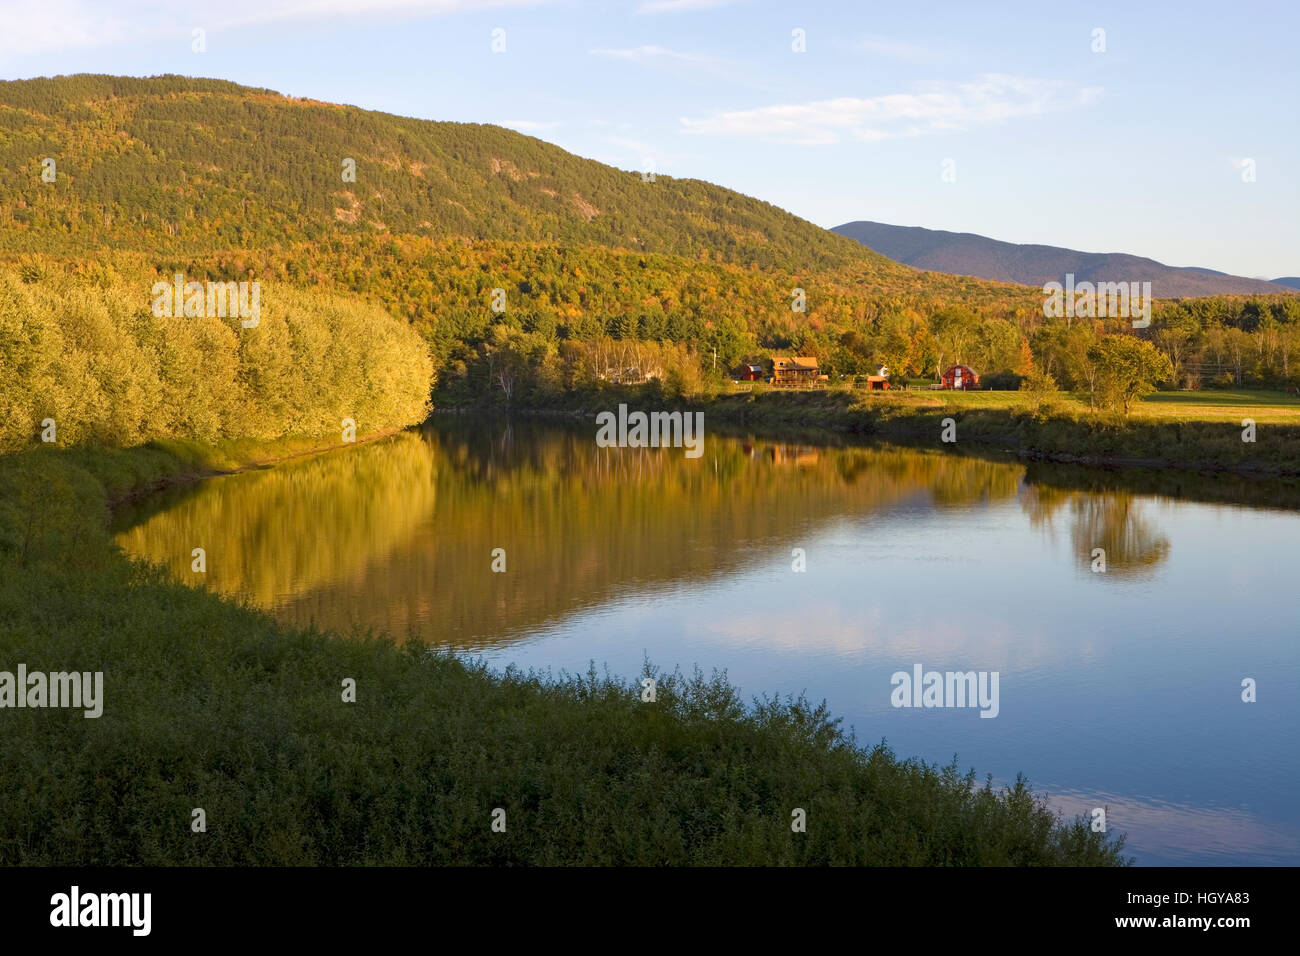 The Connecticut River in Guildhalll, Vermont.  Northumberland, New Hampshire is across the river. Stock Photo